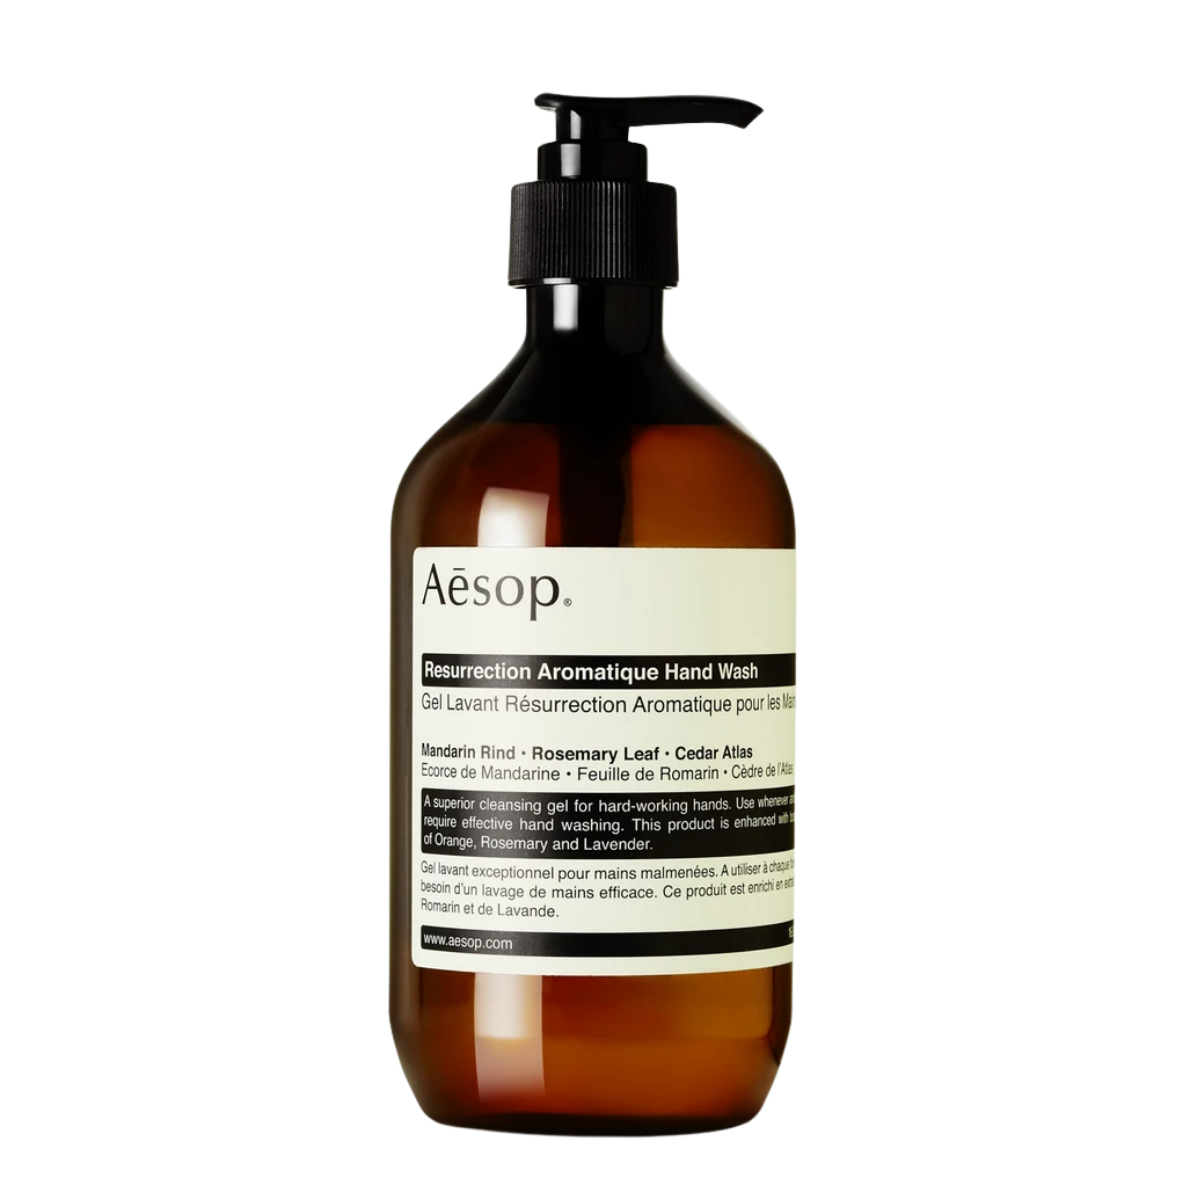 This TikTok-famous hand soap will help recent college grads announce “I’m a real adult now” to the world. $40, Net-a-Porter. <a href="https://www.net-a-porter.com/en-us/shop/product/aesop/beauty/handcare/plus-net-sustain-resurrection-aromatique-hand-wash-500ml/22831760542848493">Get it now!</a>